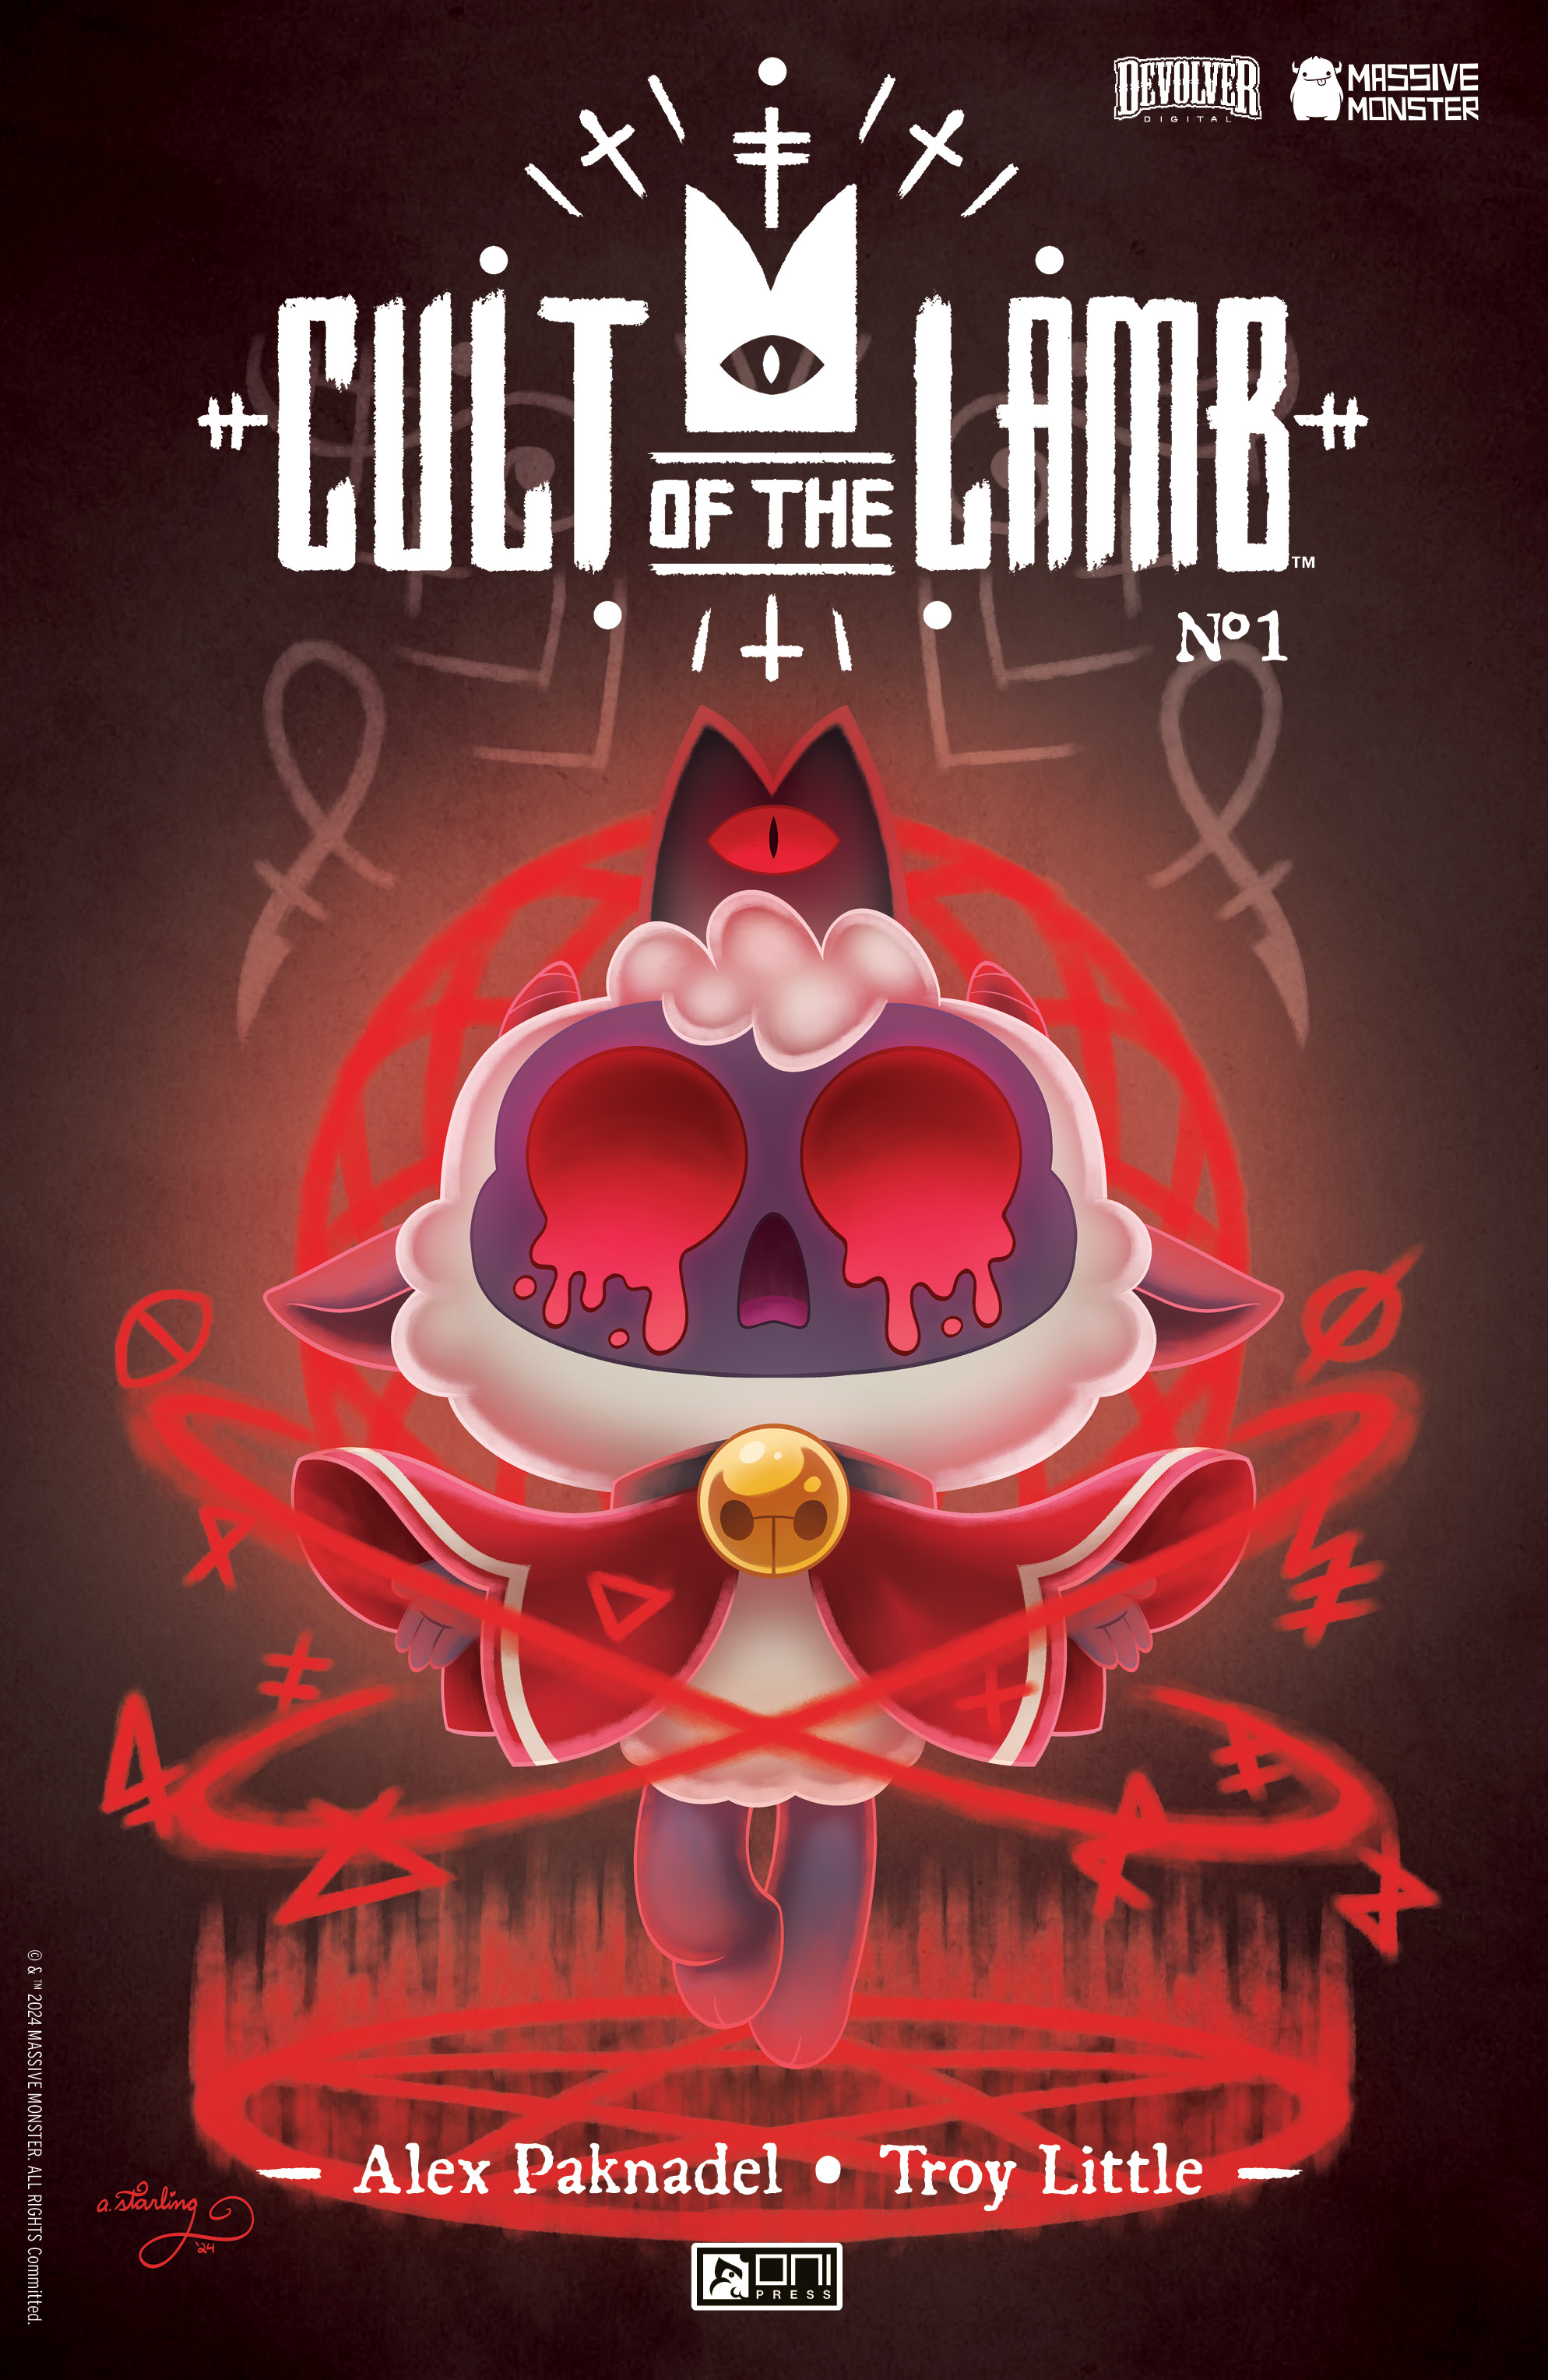 Covers from Cult of the Lamb